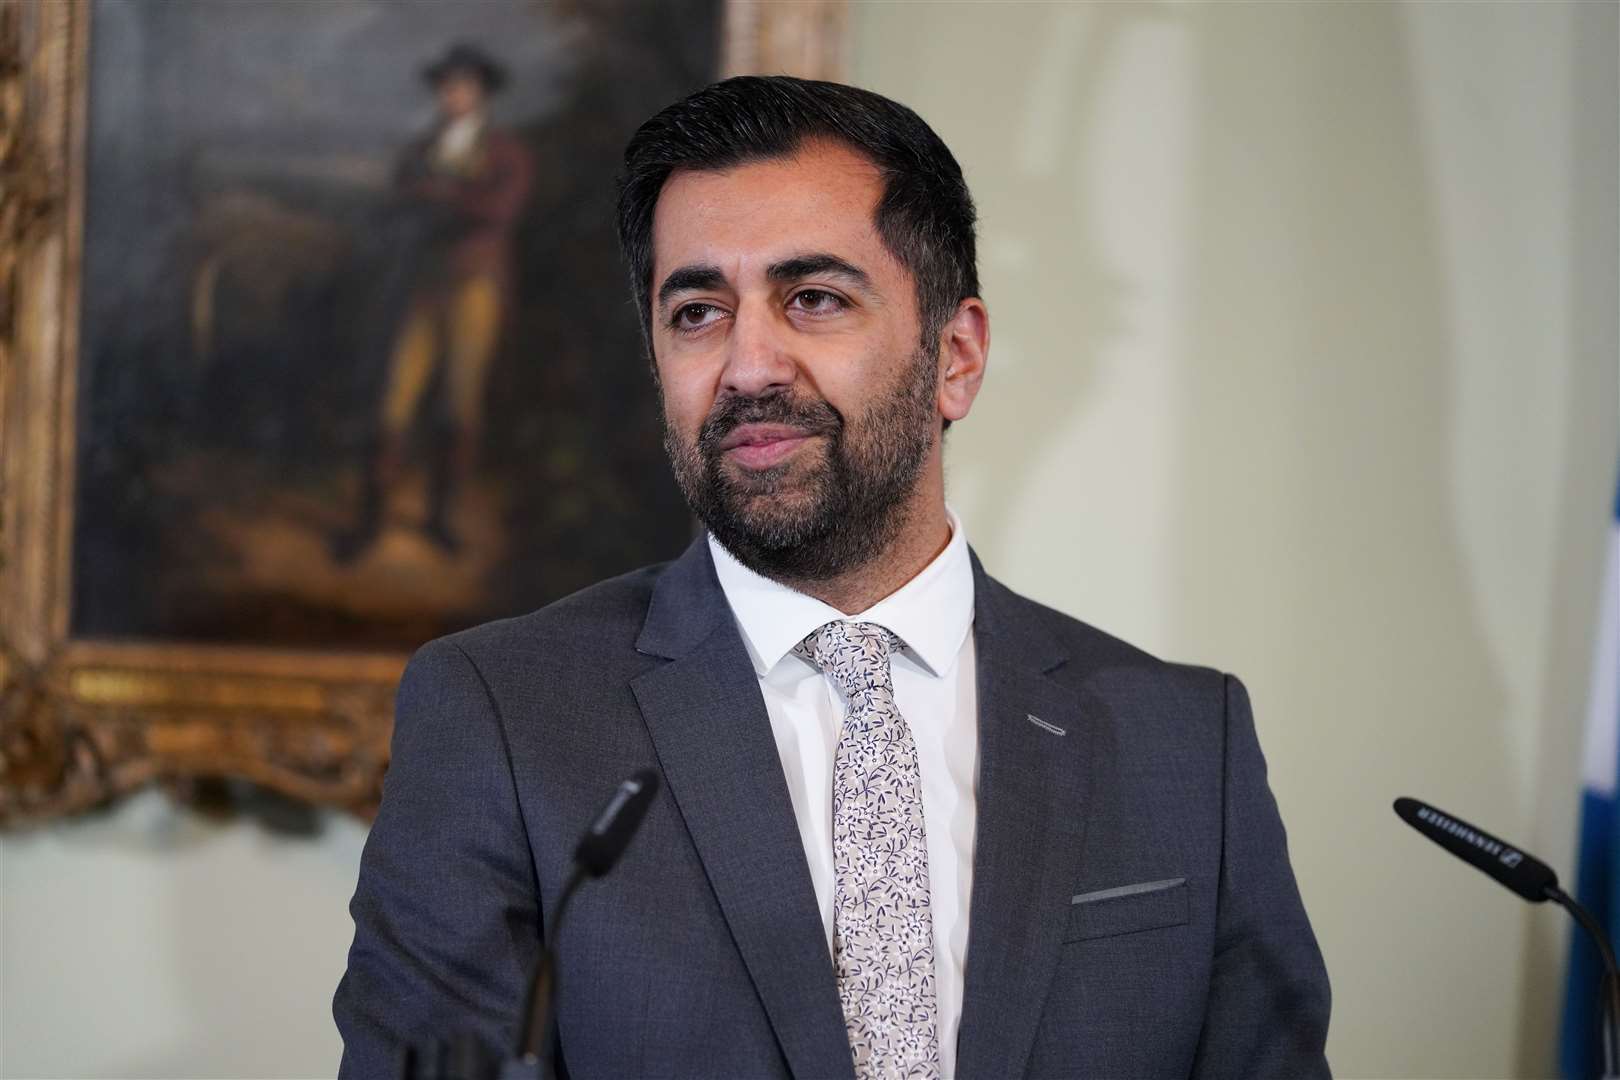 Humza Yousaf making his statement at Bute House. He was facing two motions of no confidence.